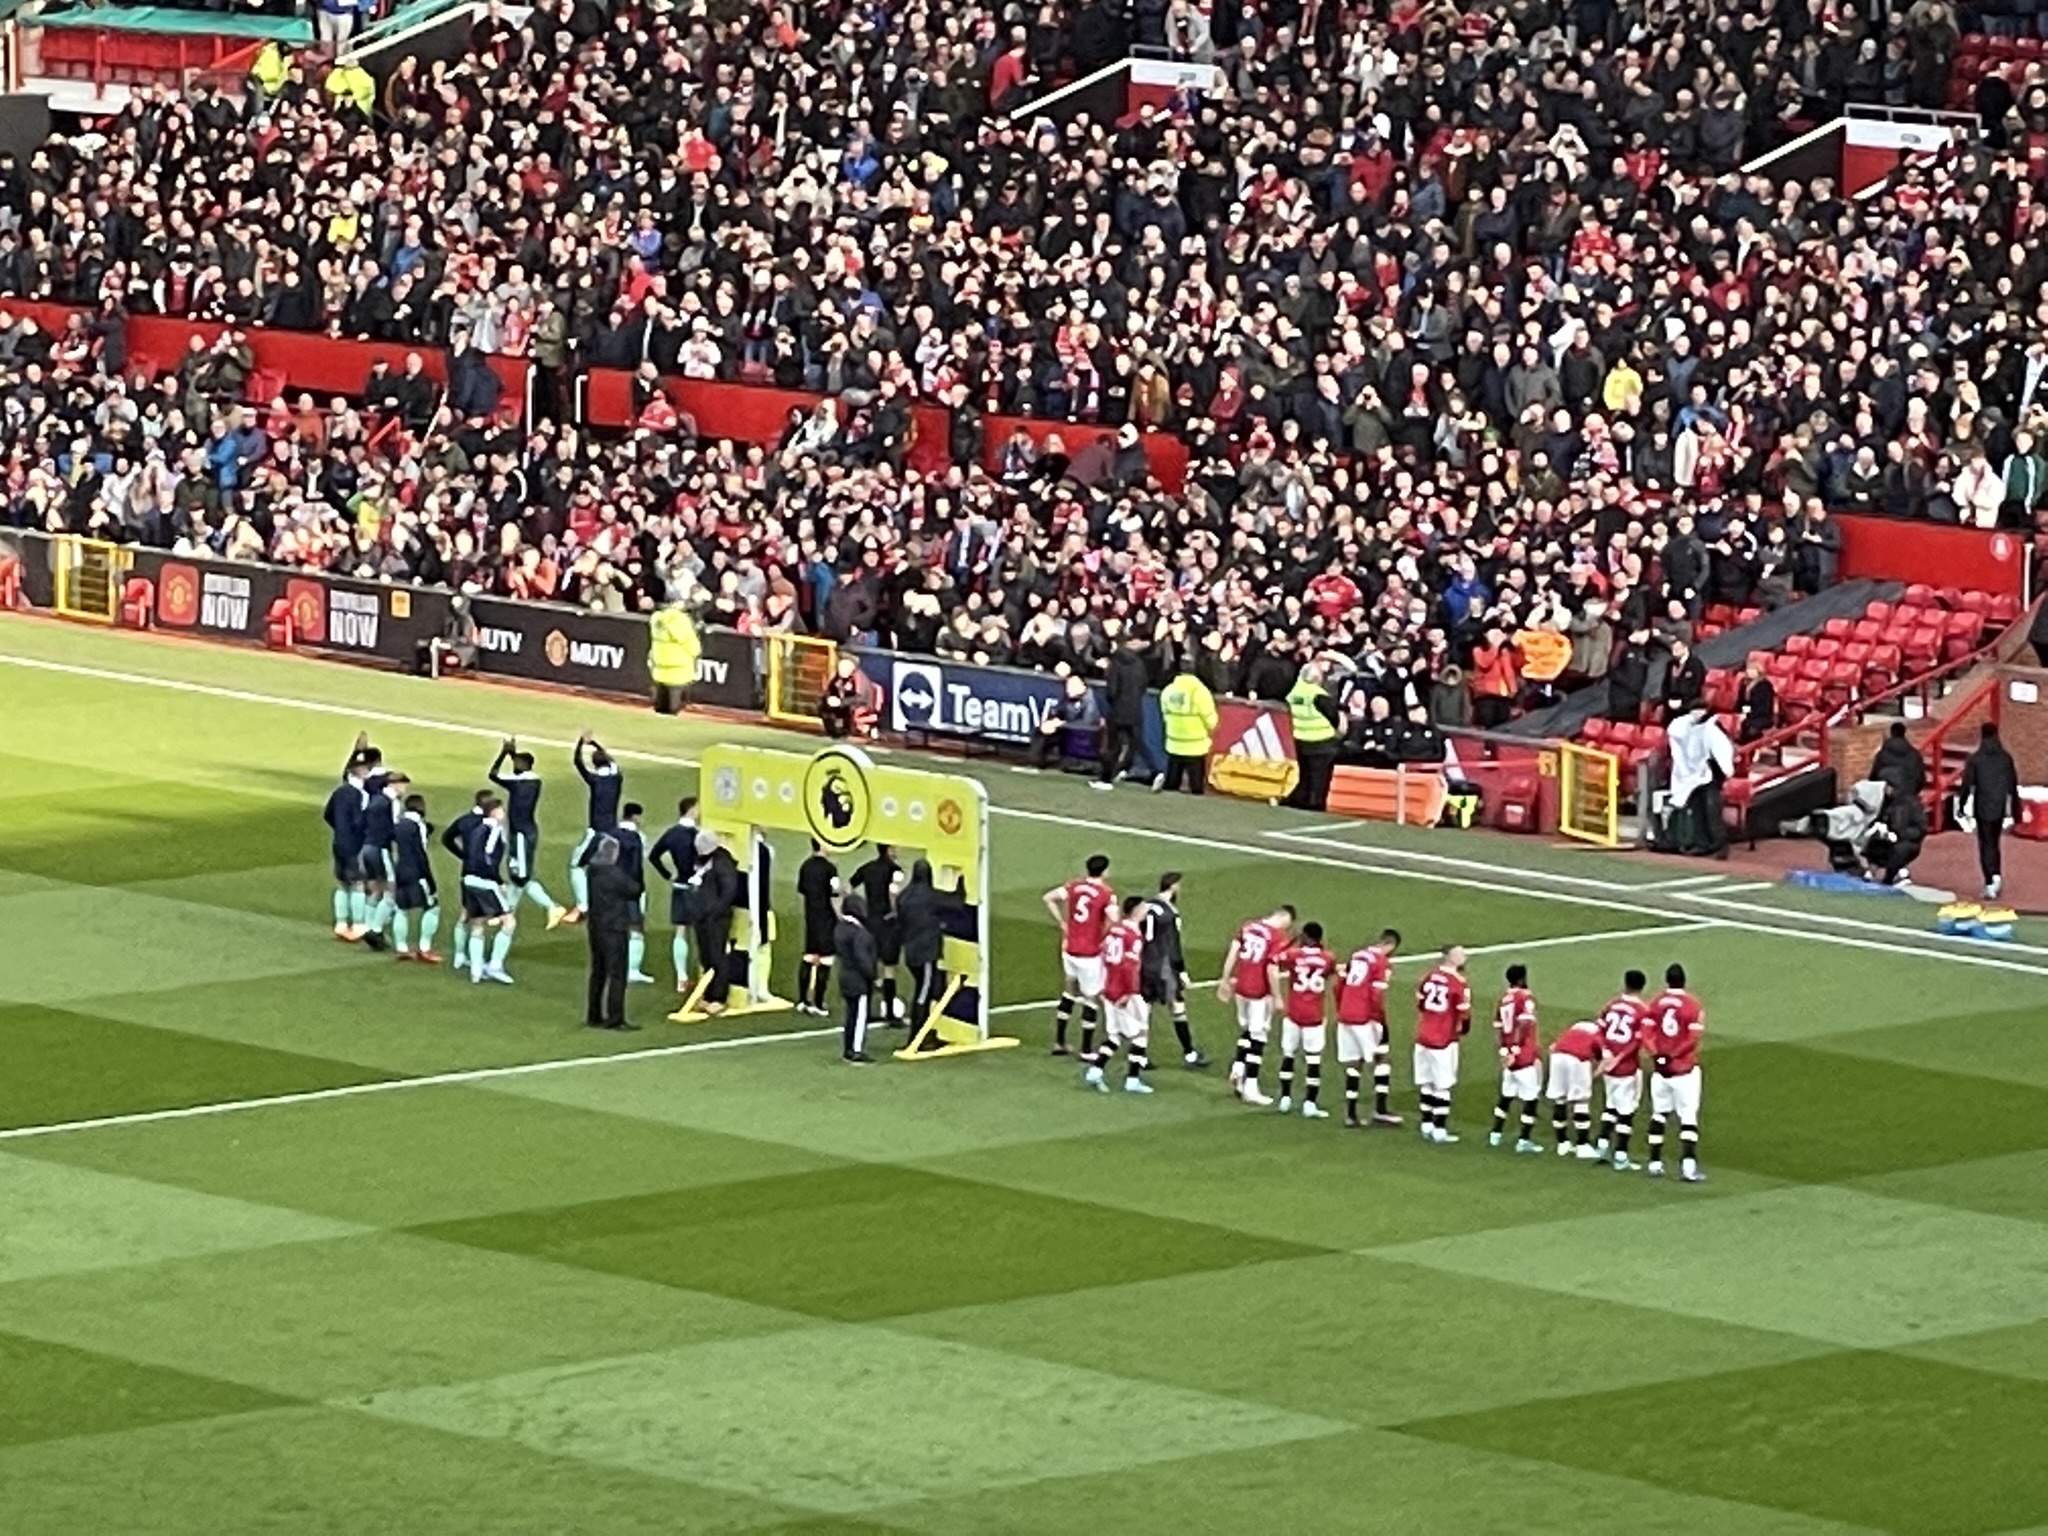 Manchester United v Leicester City - Saturday 2nd April 2022 image 4